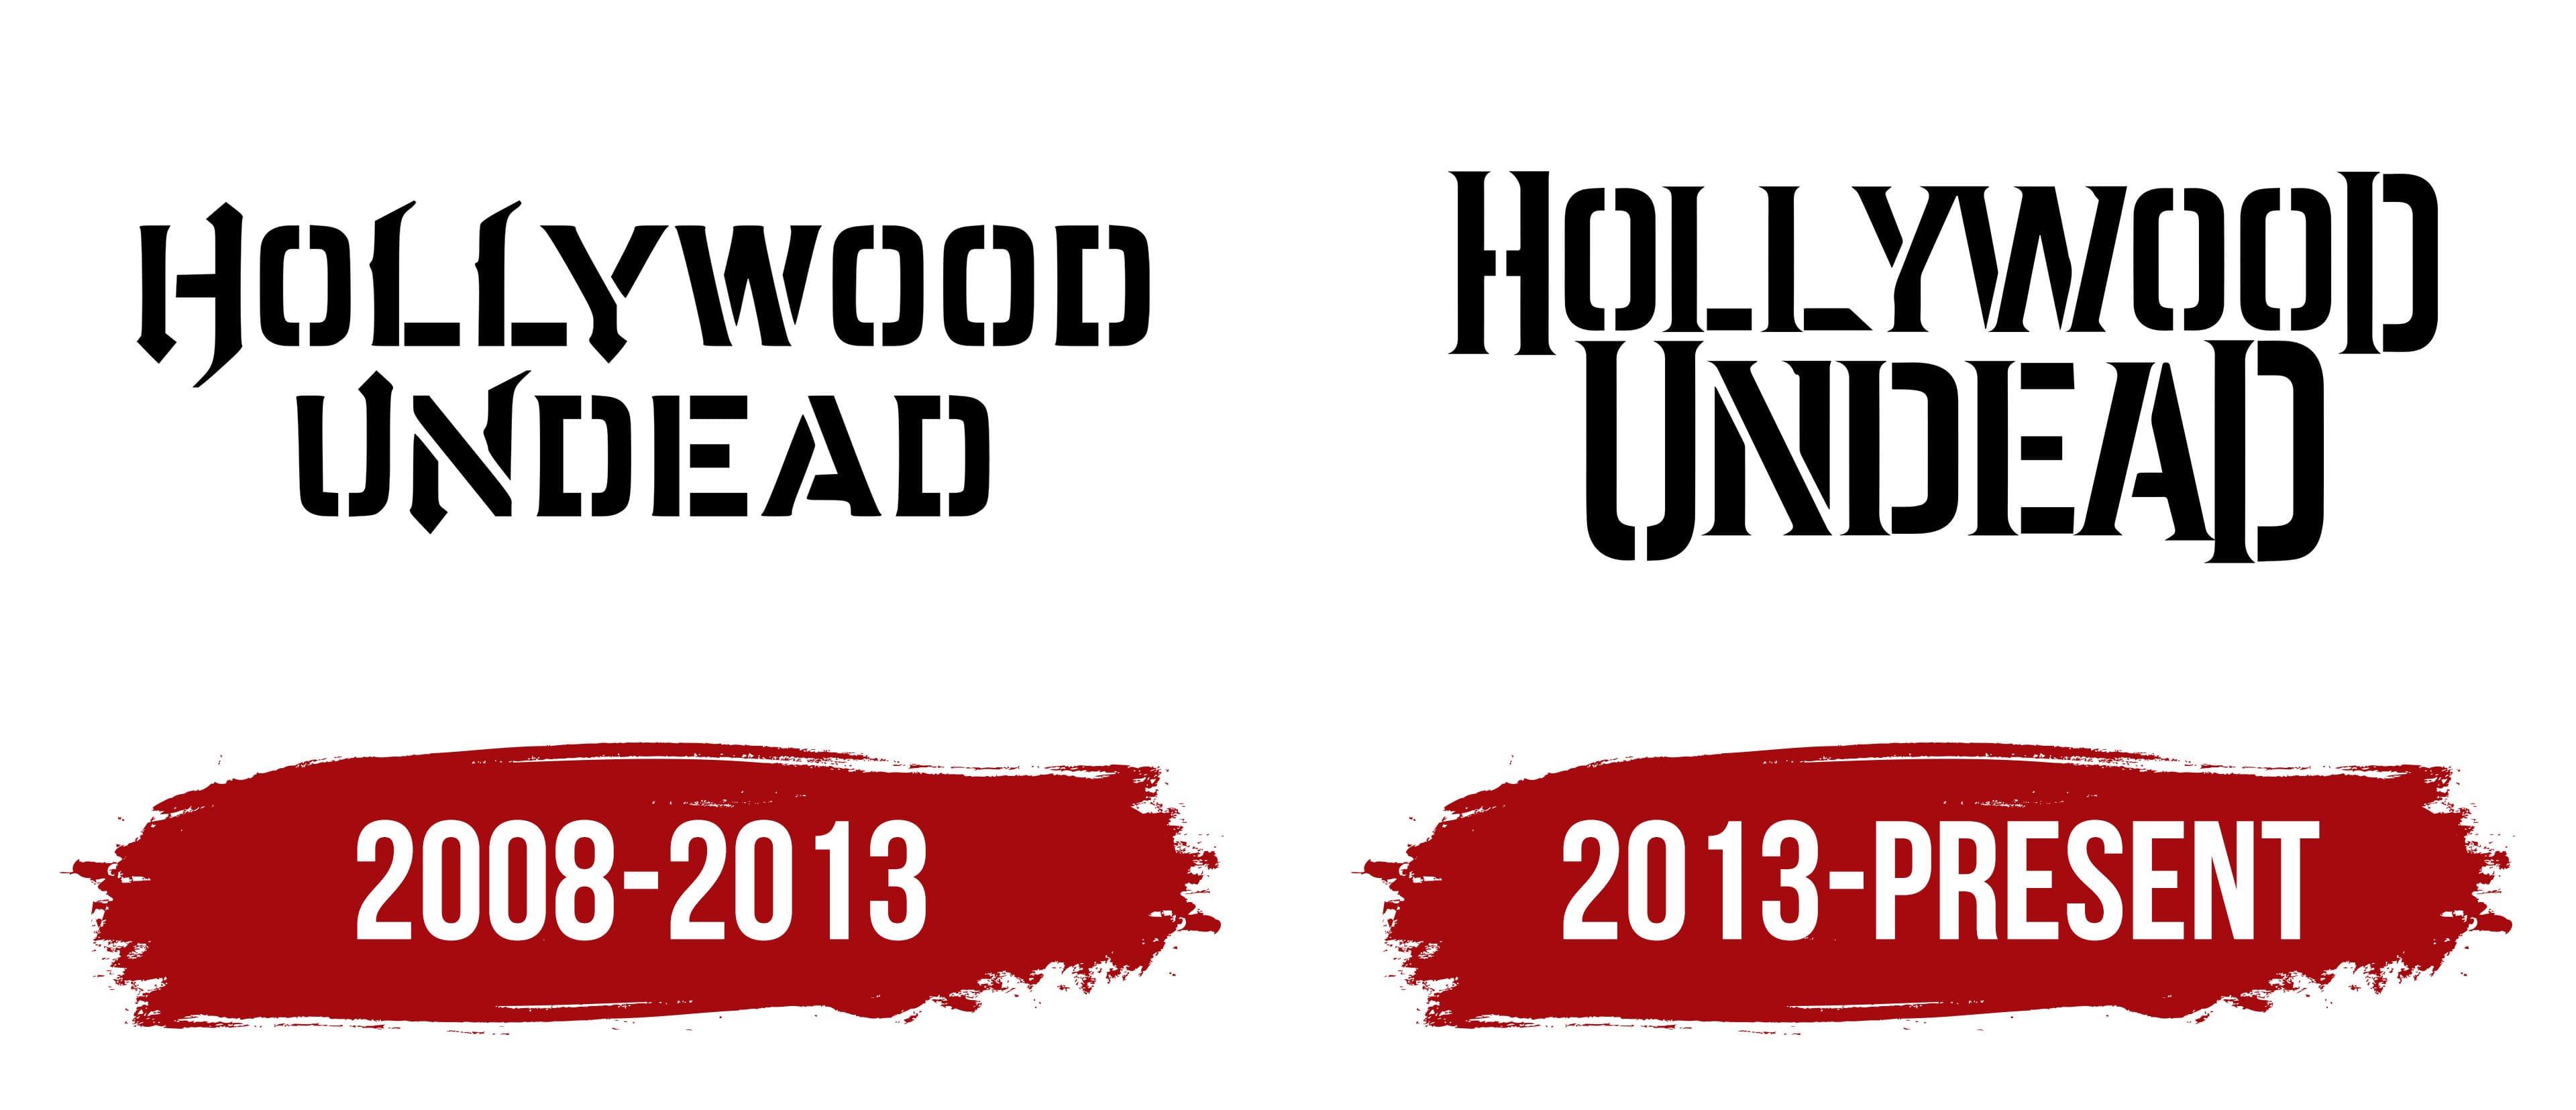 Caras Hollywood Undead transparent background PNG clipart